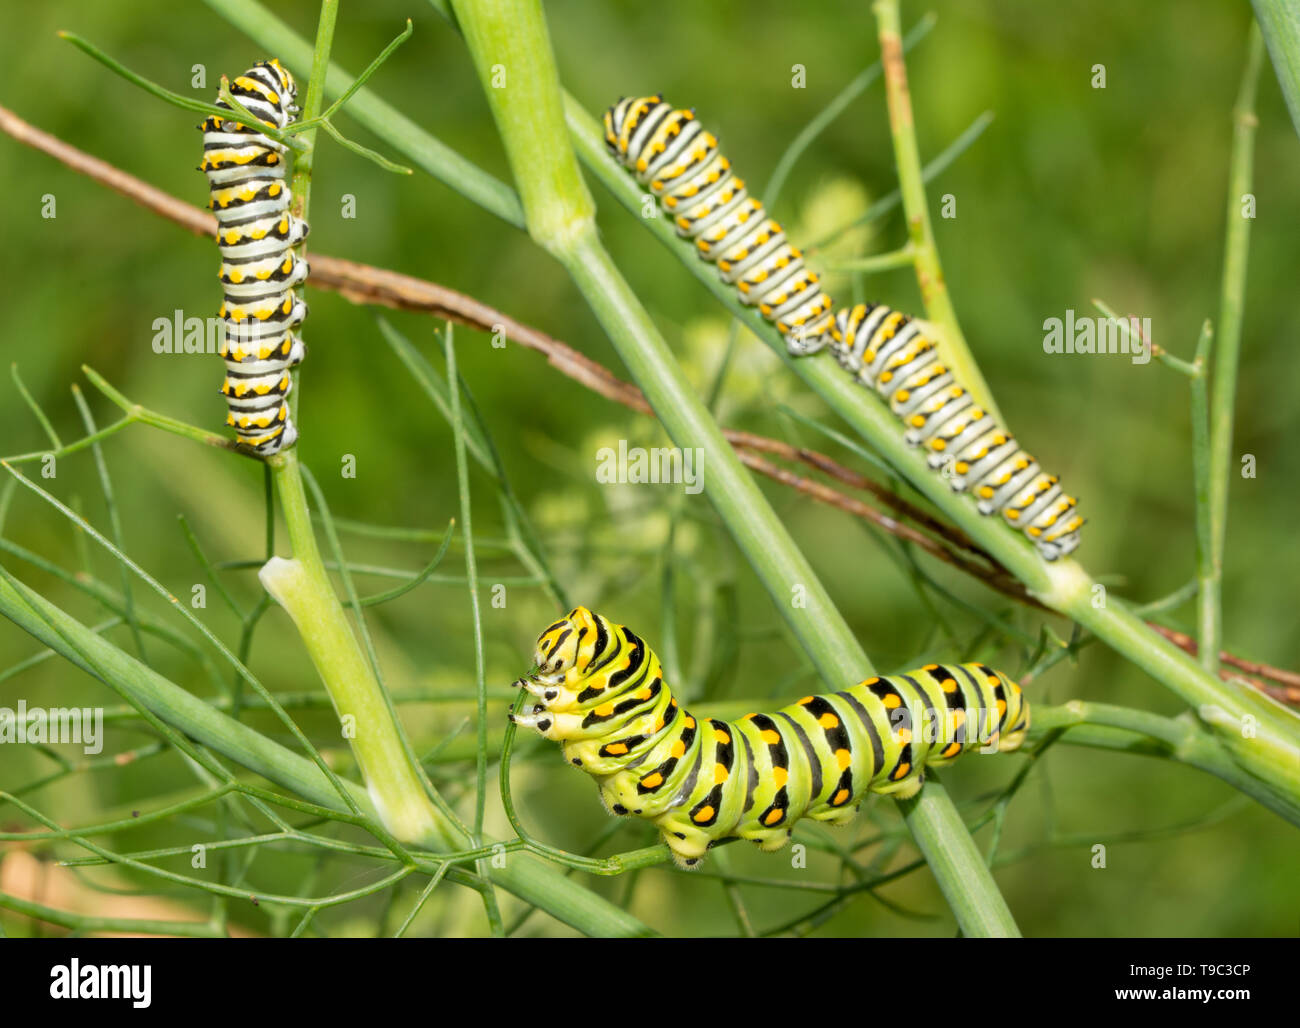 Green, yellow and black striped fifth instar of an Eastern Black Swallowtail butterfly caterpillar feeding on a fennel, with three fourth instars on t Stock Photo